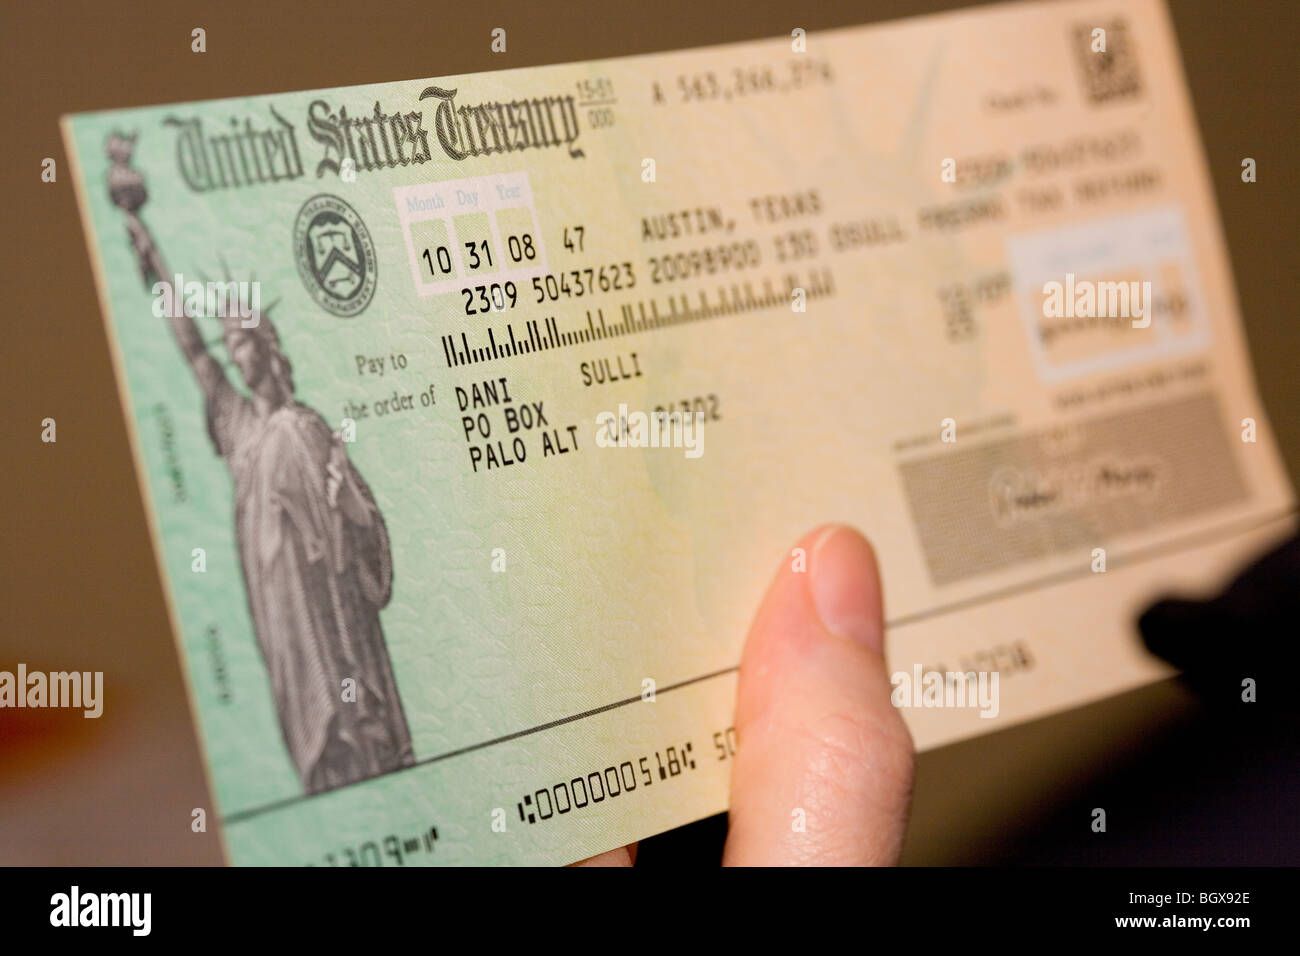 what-to-do-with-your-tax-refund-cbs-news